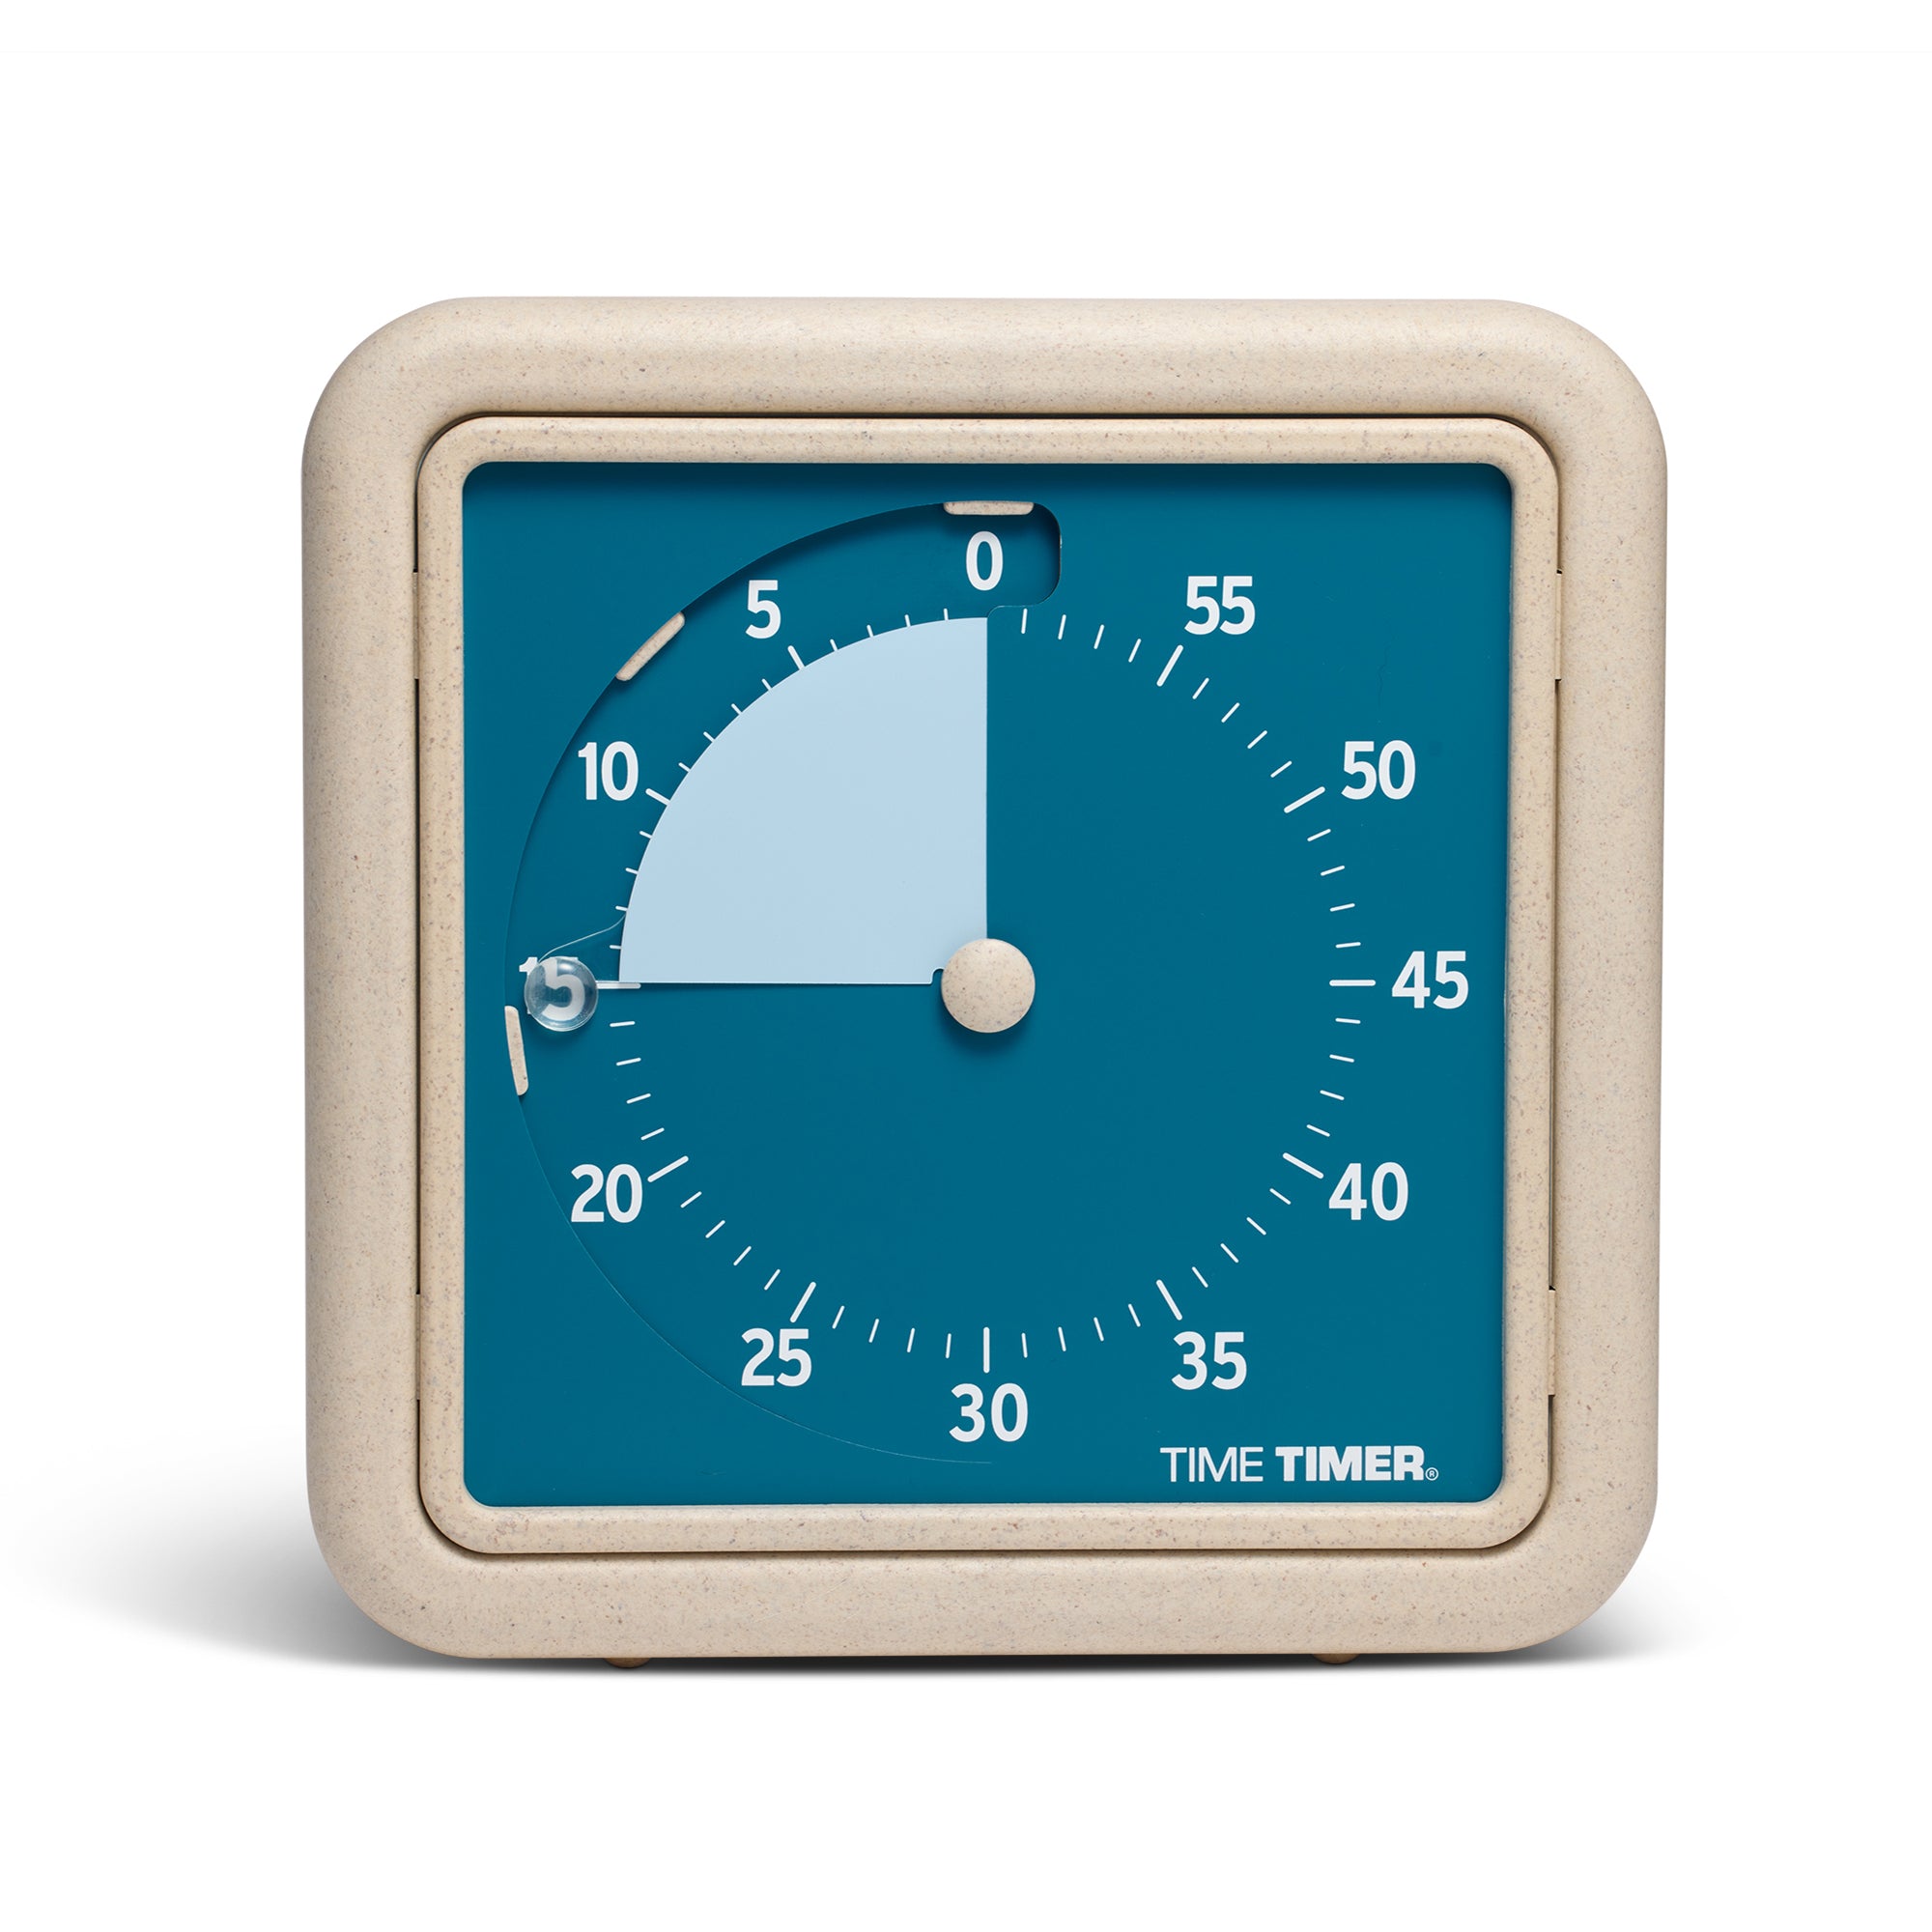 The Time Timer RETRO - Eco Edition in the "Blue Water" variant color is shown straight on. This is a 60-minute visual timer with a textured beige frame, a dark blue background and a light blue disk. The disk is set at the 15 minute duration. 